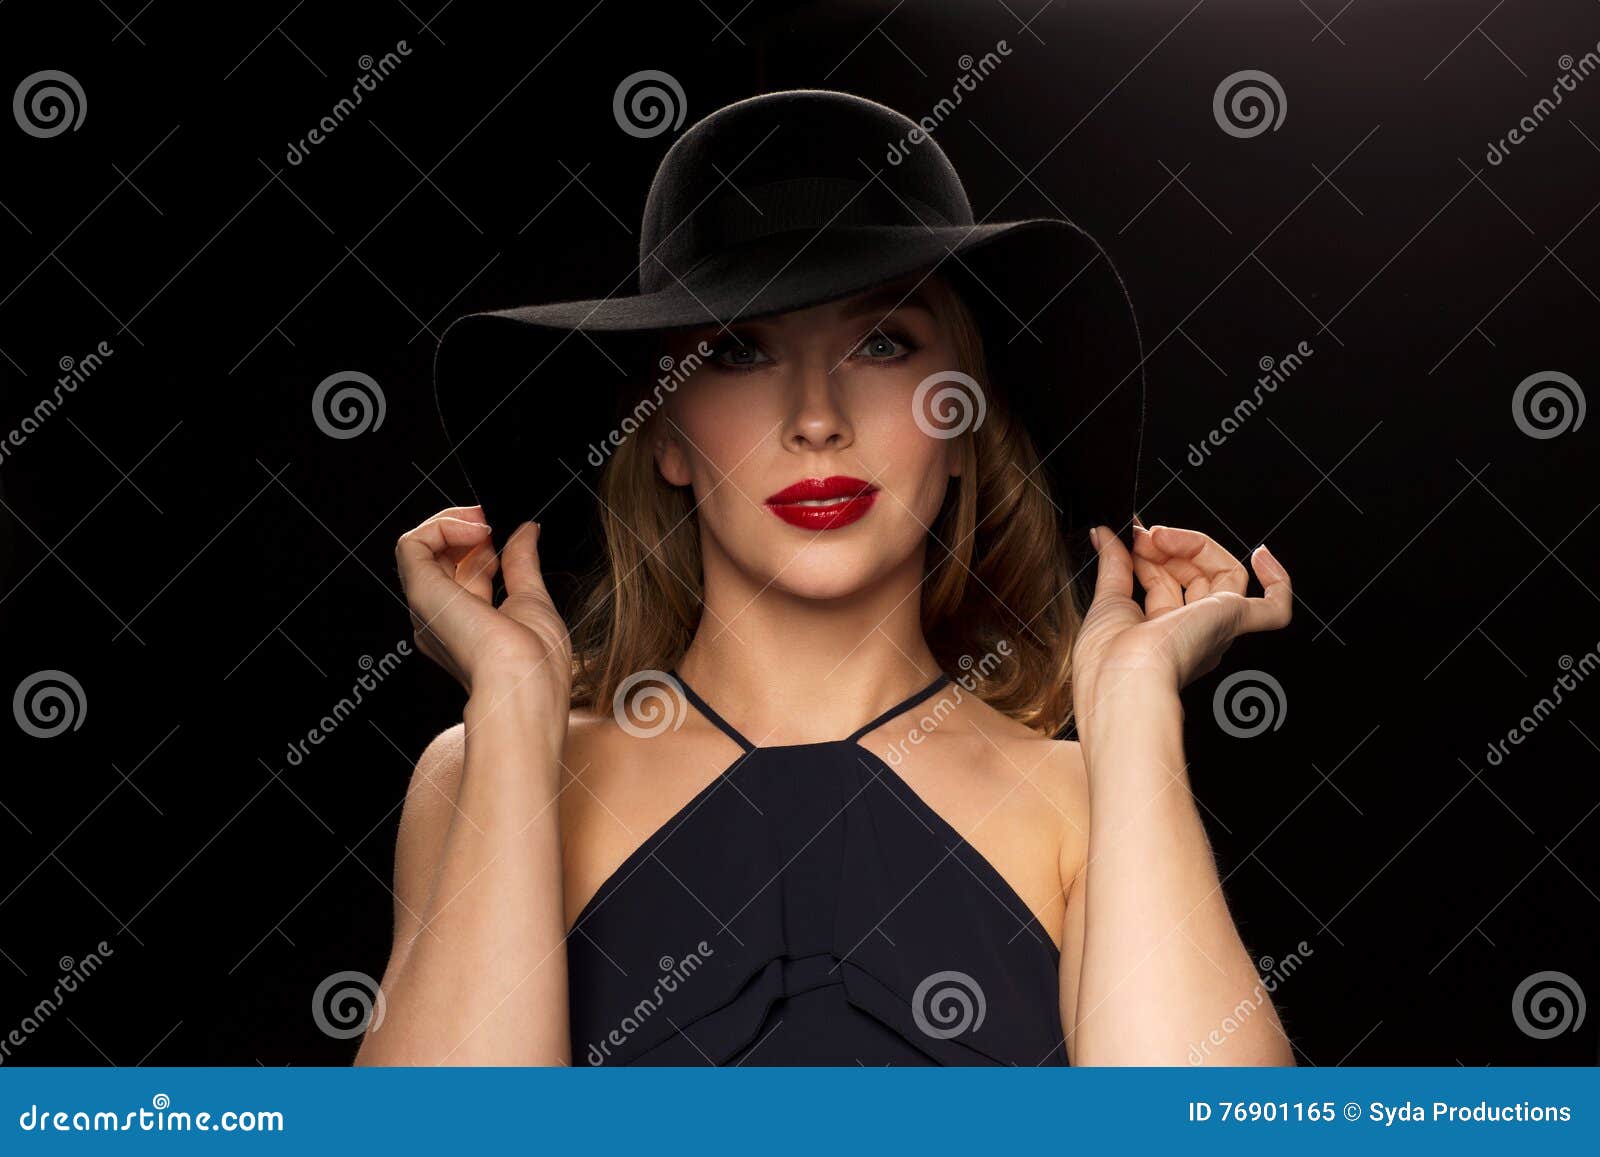 Beautiful Woman in Black Hat Over Dark Background Stock Image - Image ...